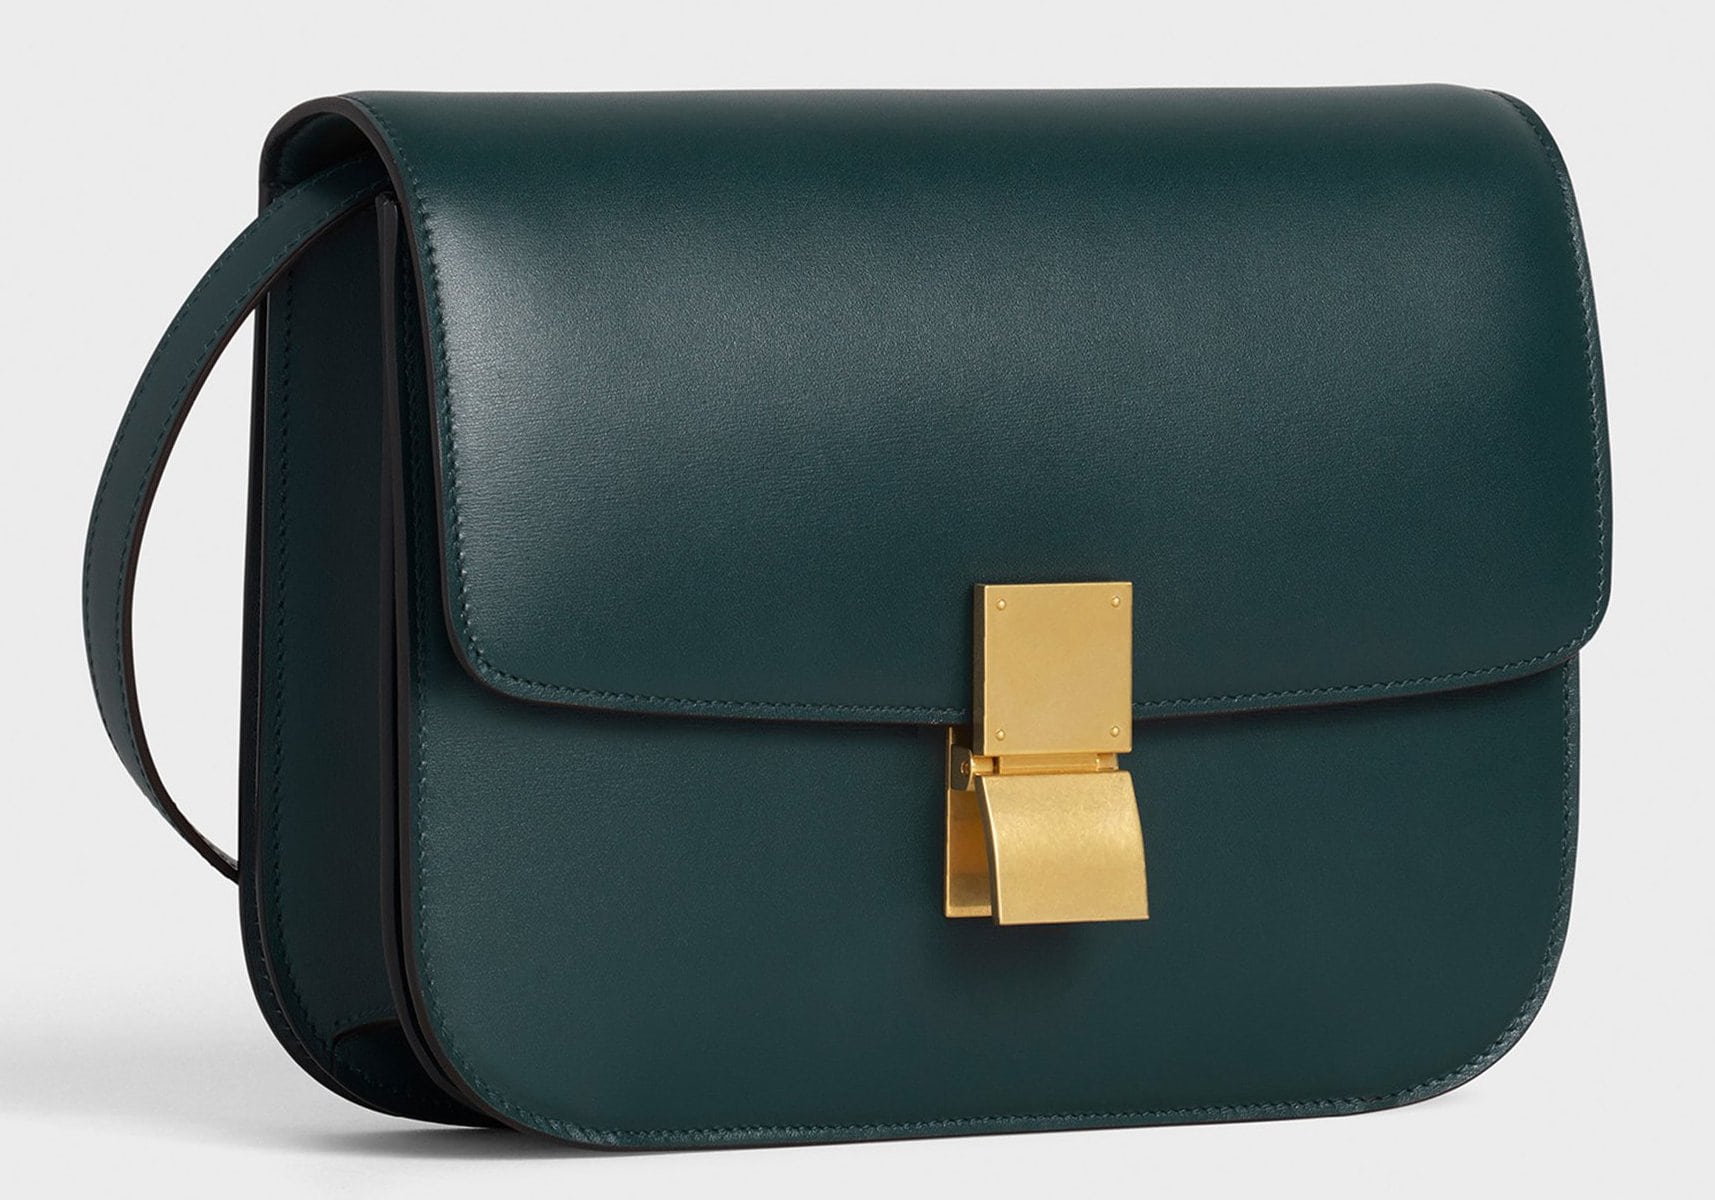 A medium classic bag that features a chic boxy silhouette, finished with metallic clasp closure